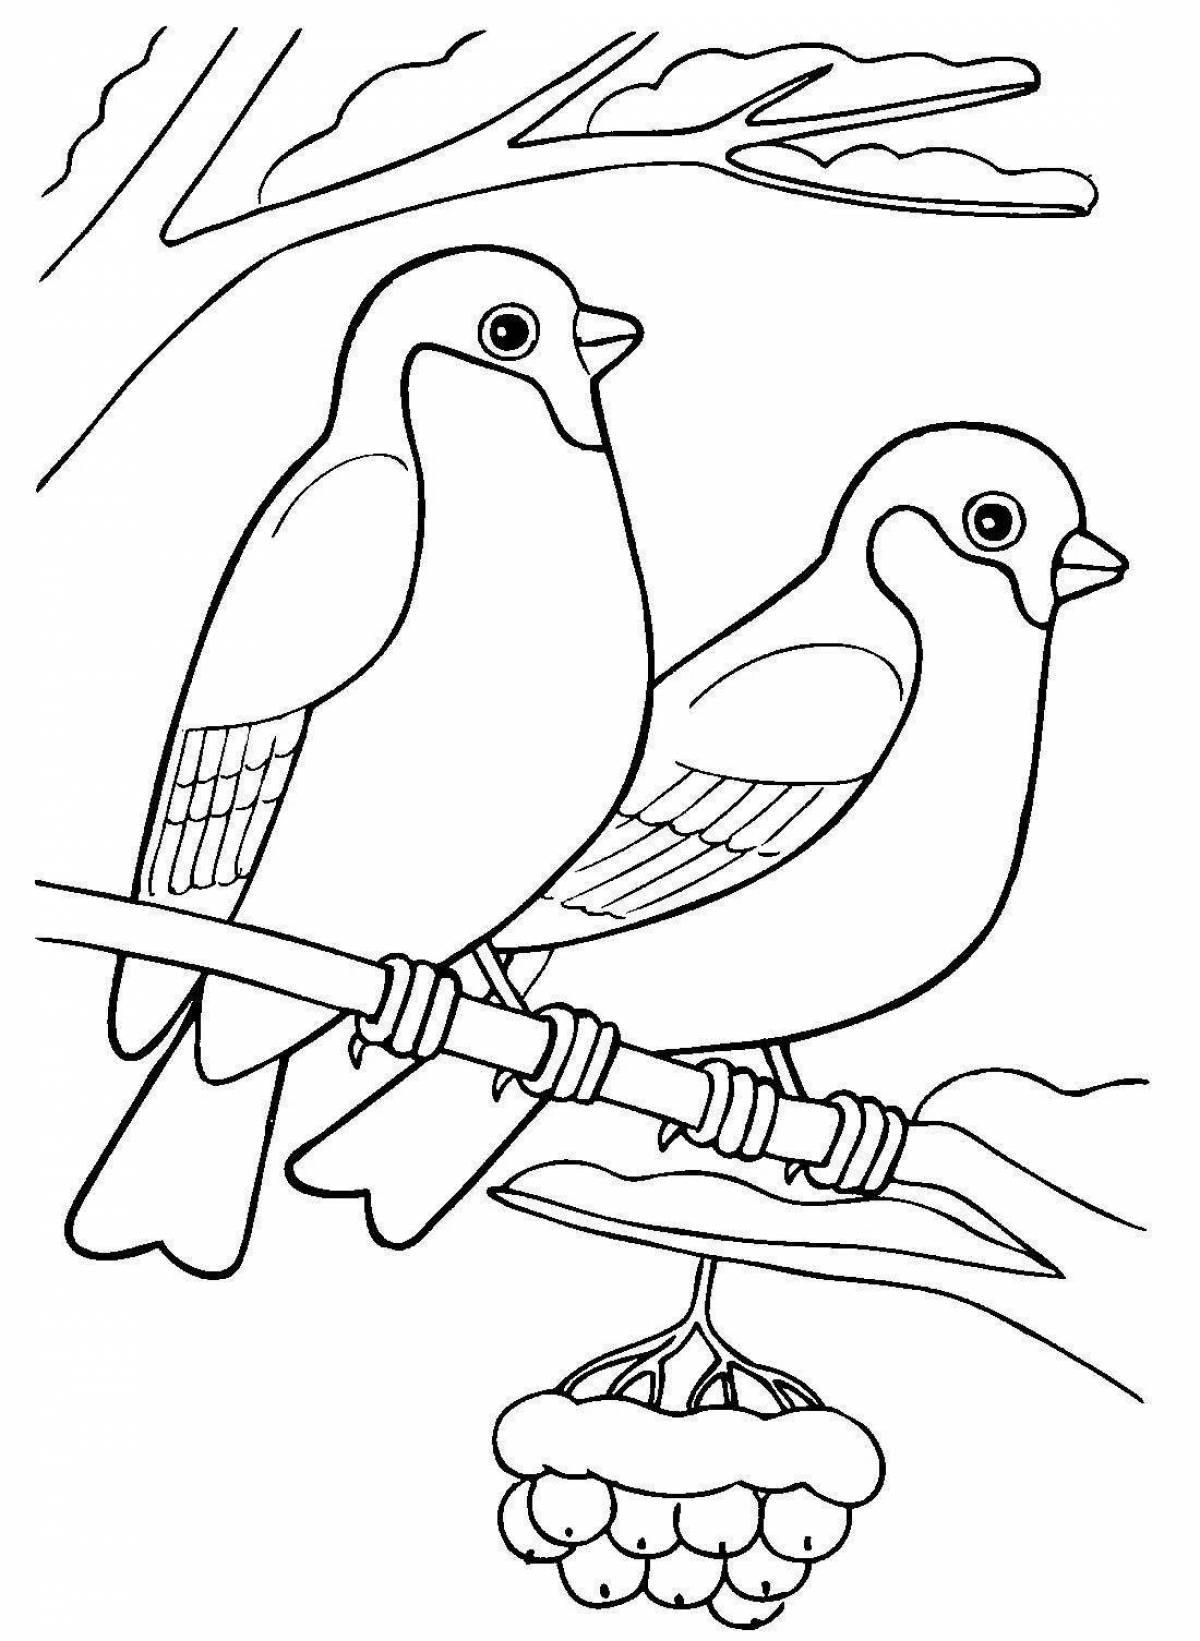 Great 1st grade birds coloring page